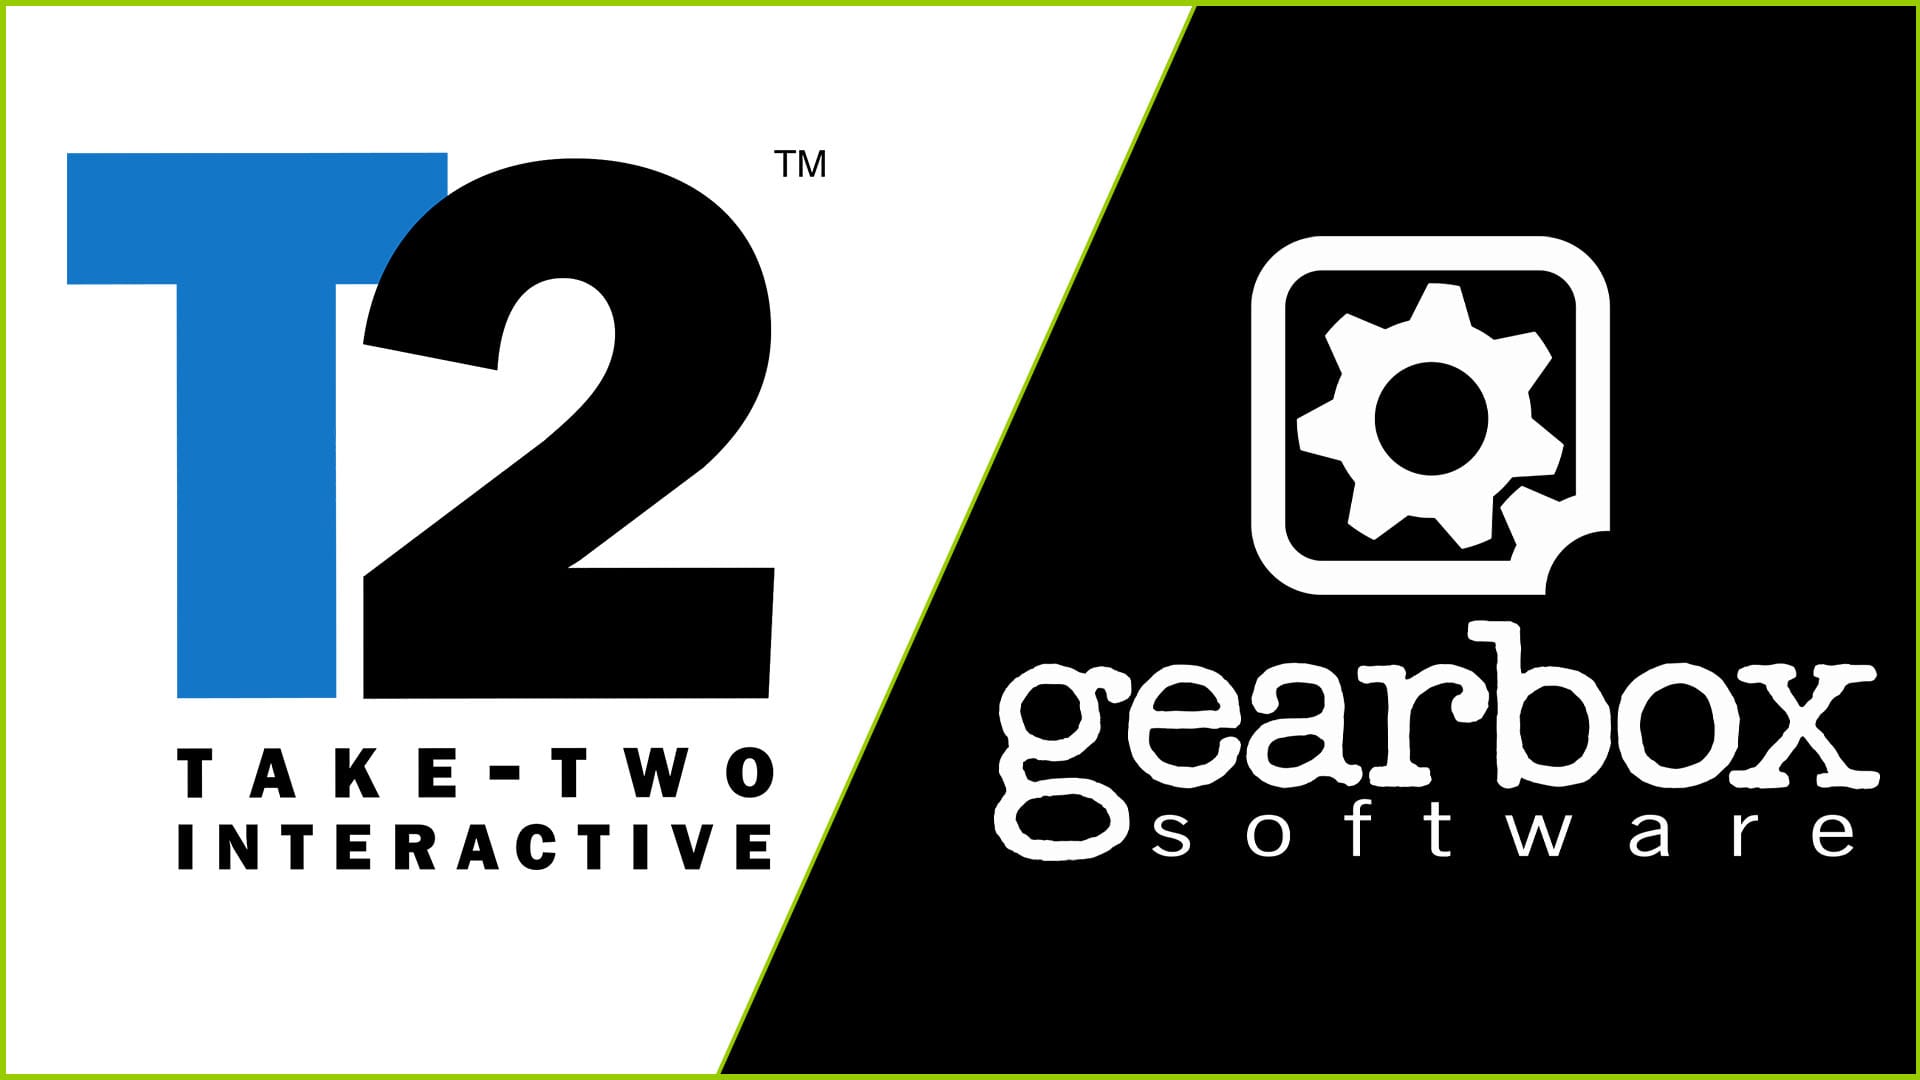 Grand Theft Auto Publisher Take-Two to Acquire Gearbox from Embracer, New Borderlands in Development